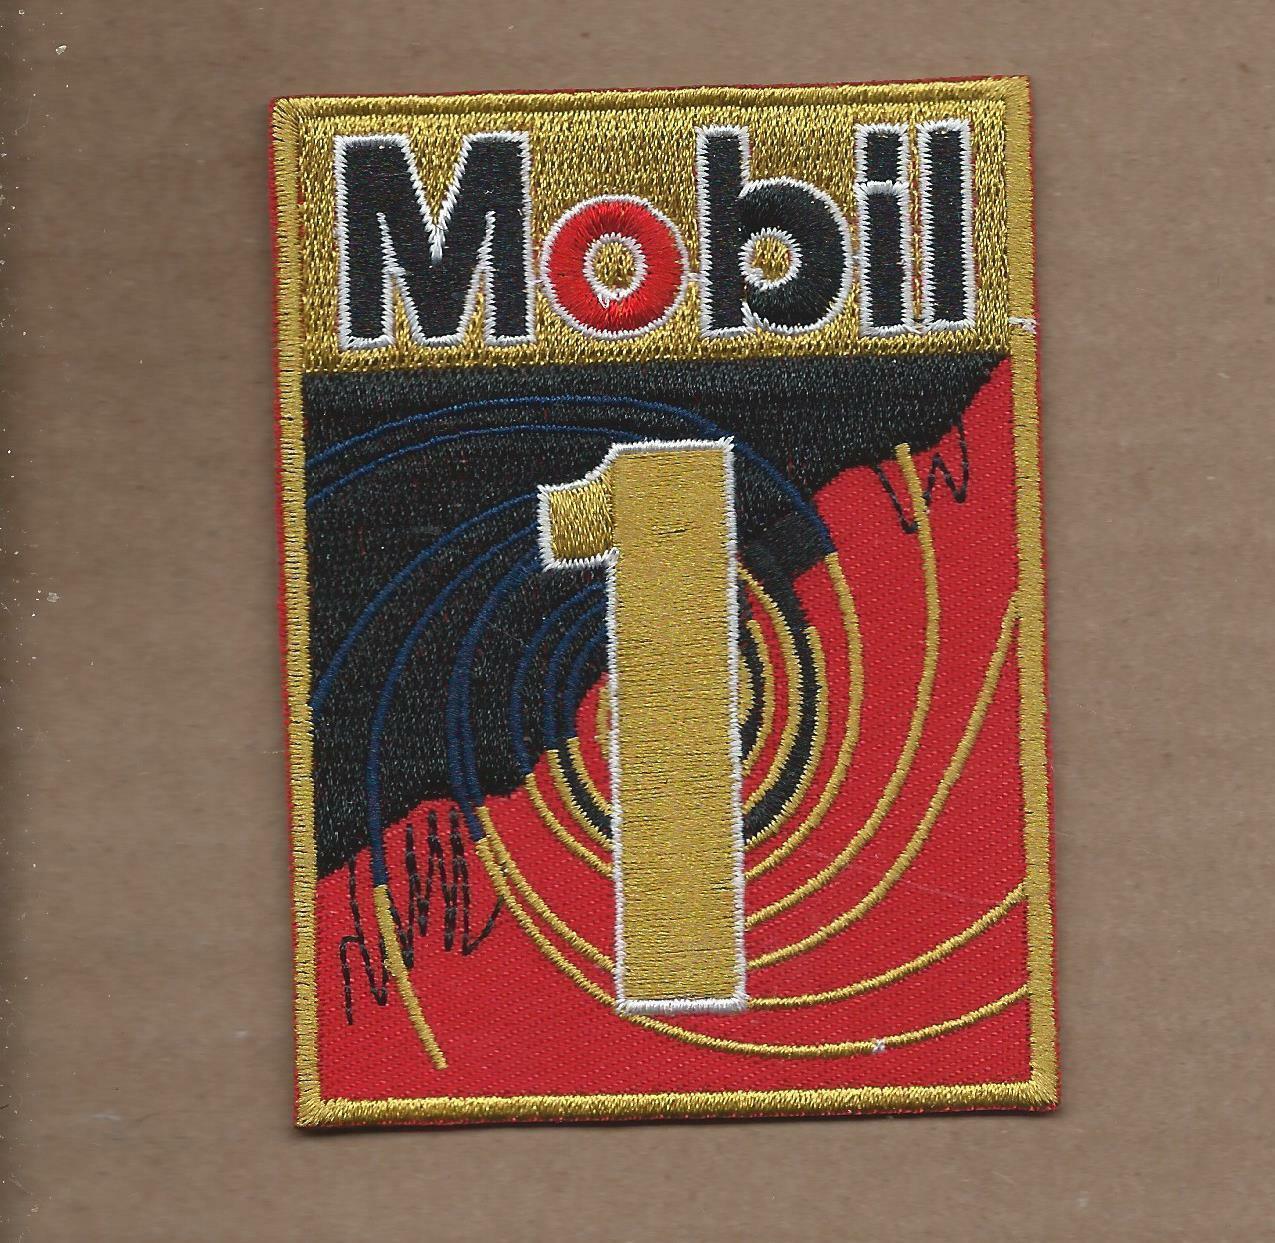 NEW 2 5/8 X 3 1/2 INCH MOBIL 1 IRON ON PATCH  E1